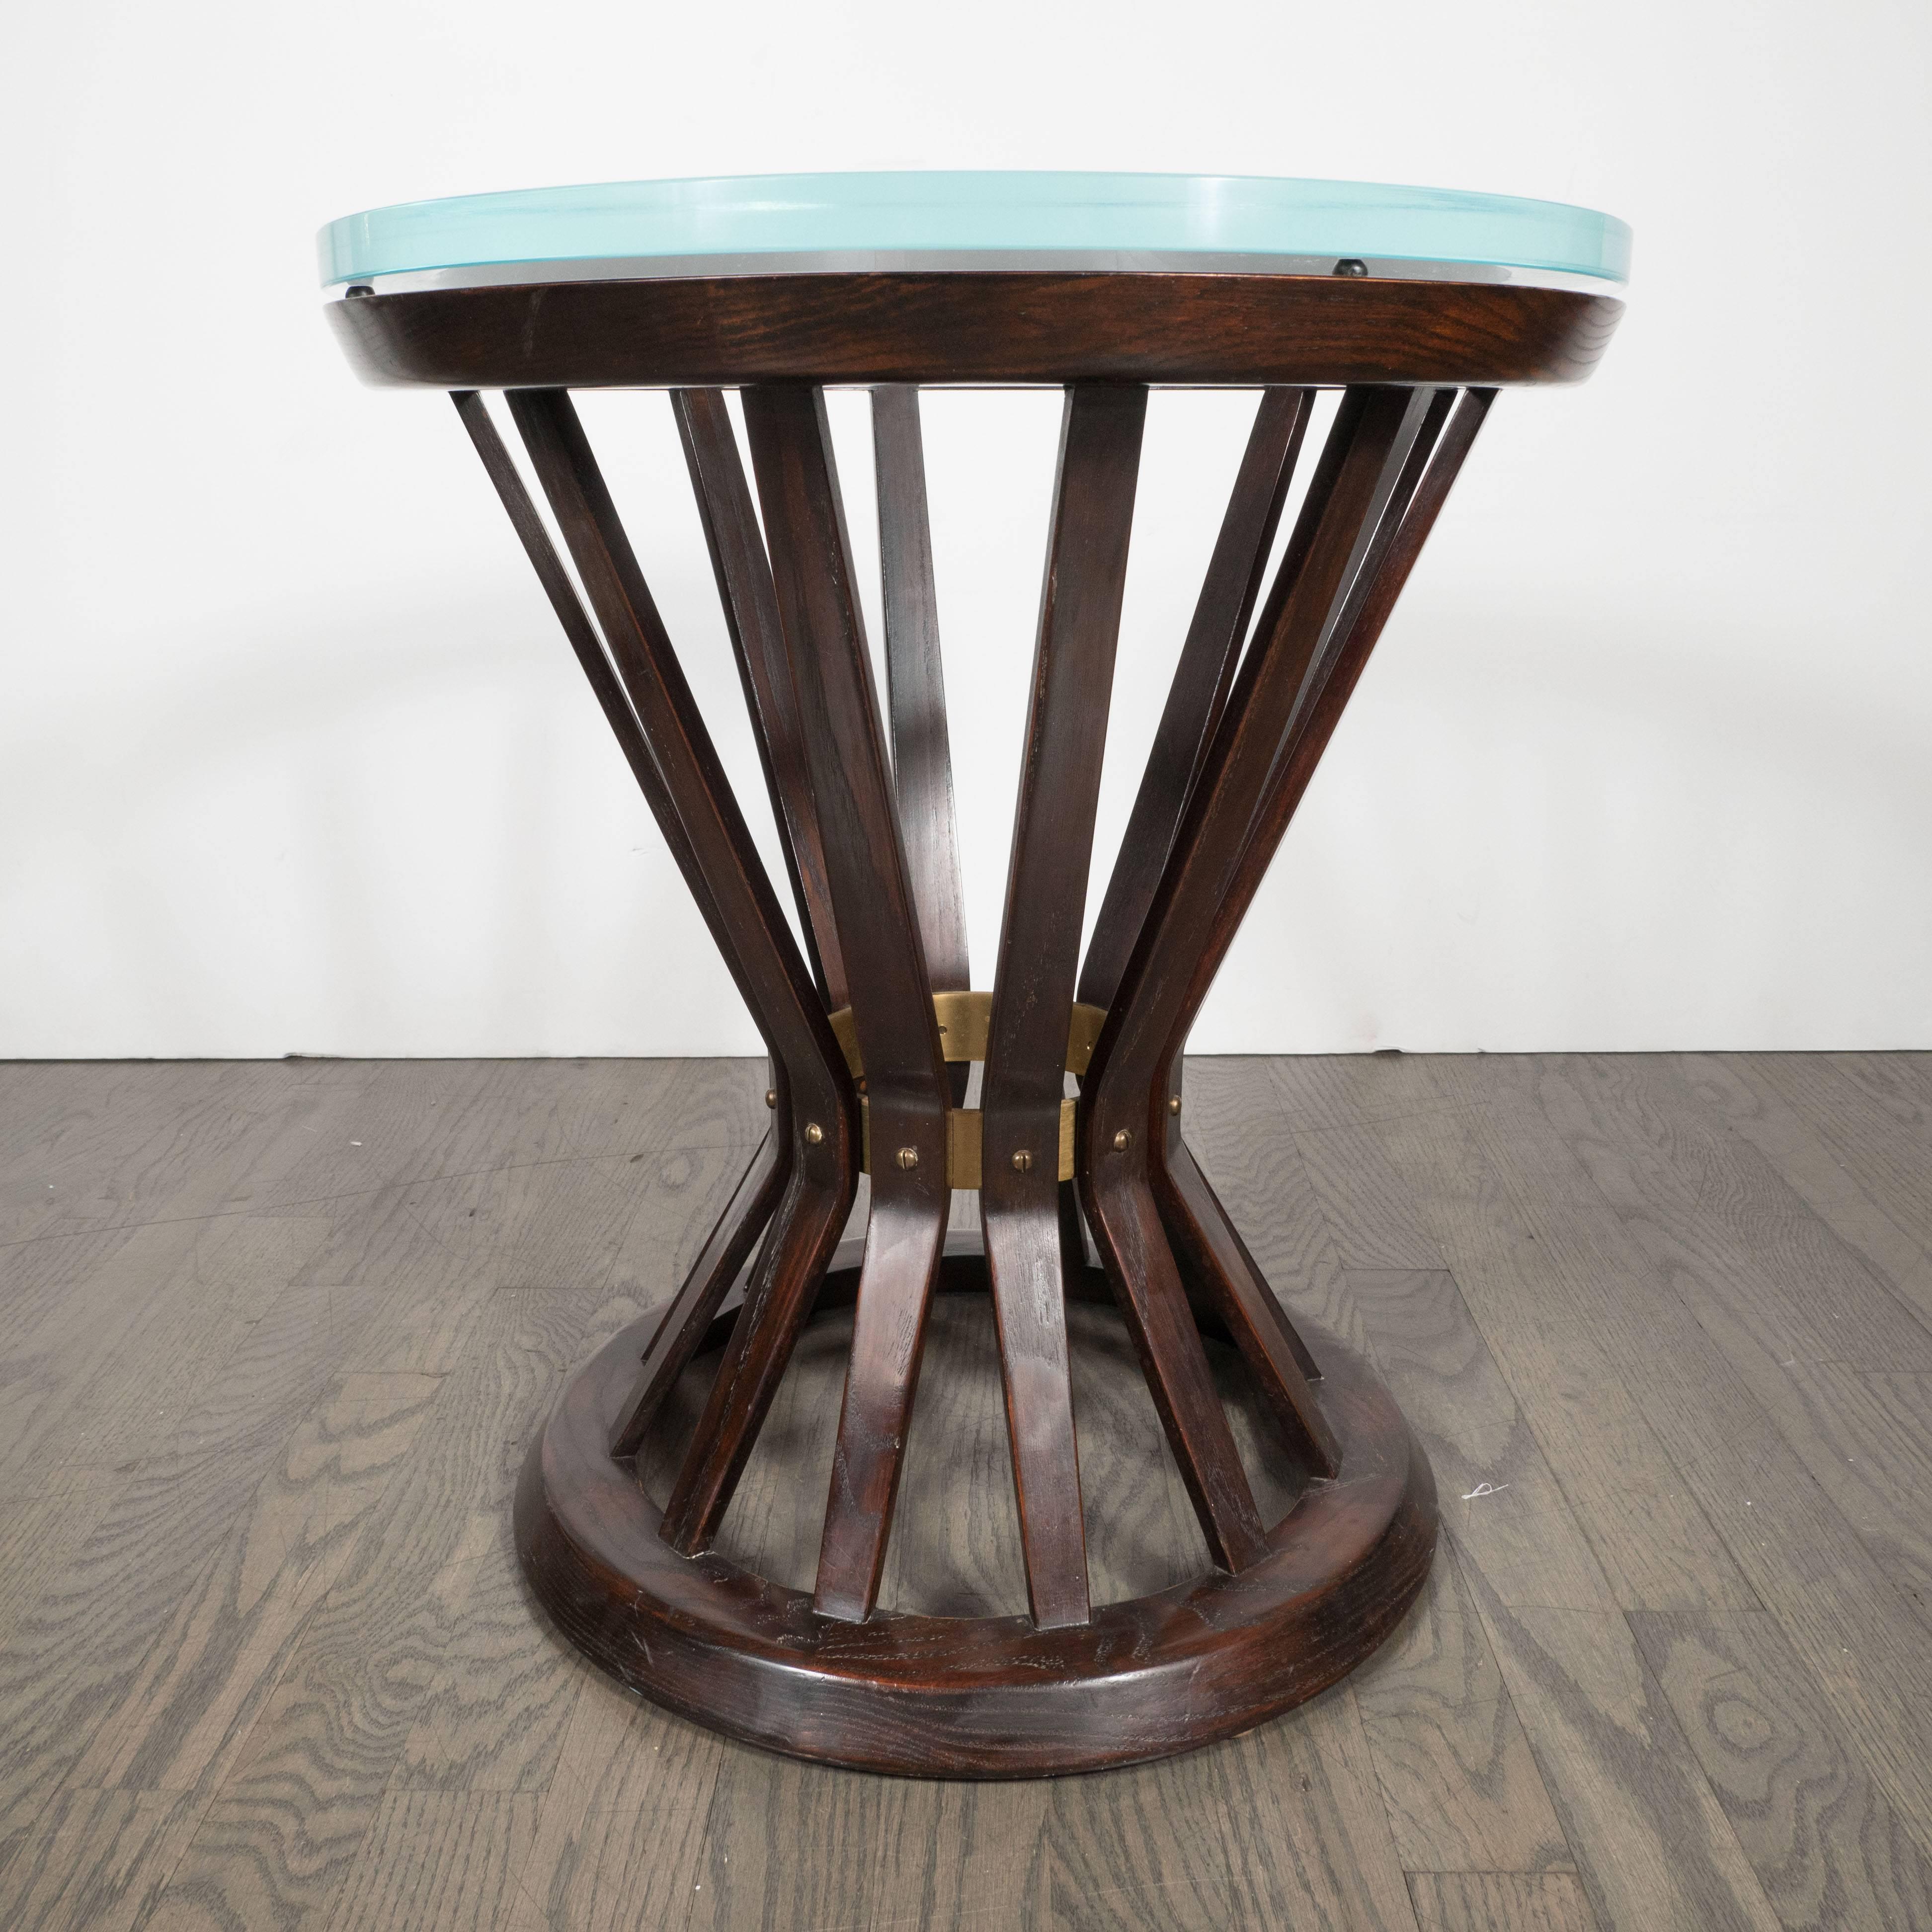 This sophisticated Mid-Century Modern occasional table was created by the illustrious American designer Edward Wormley for Dunbar. It features a geometric hourglass form with multiple stokes of ebonized walnut tapering towards the center where they